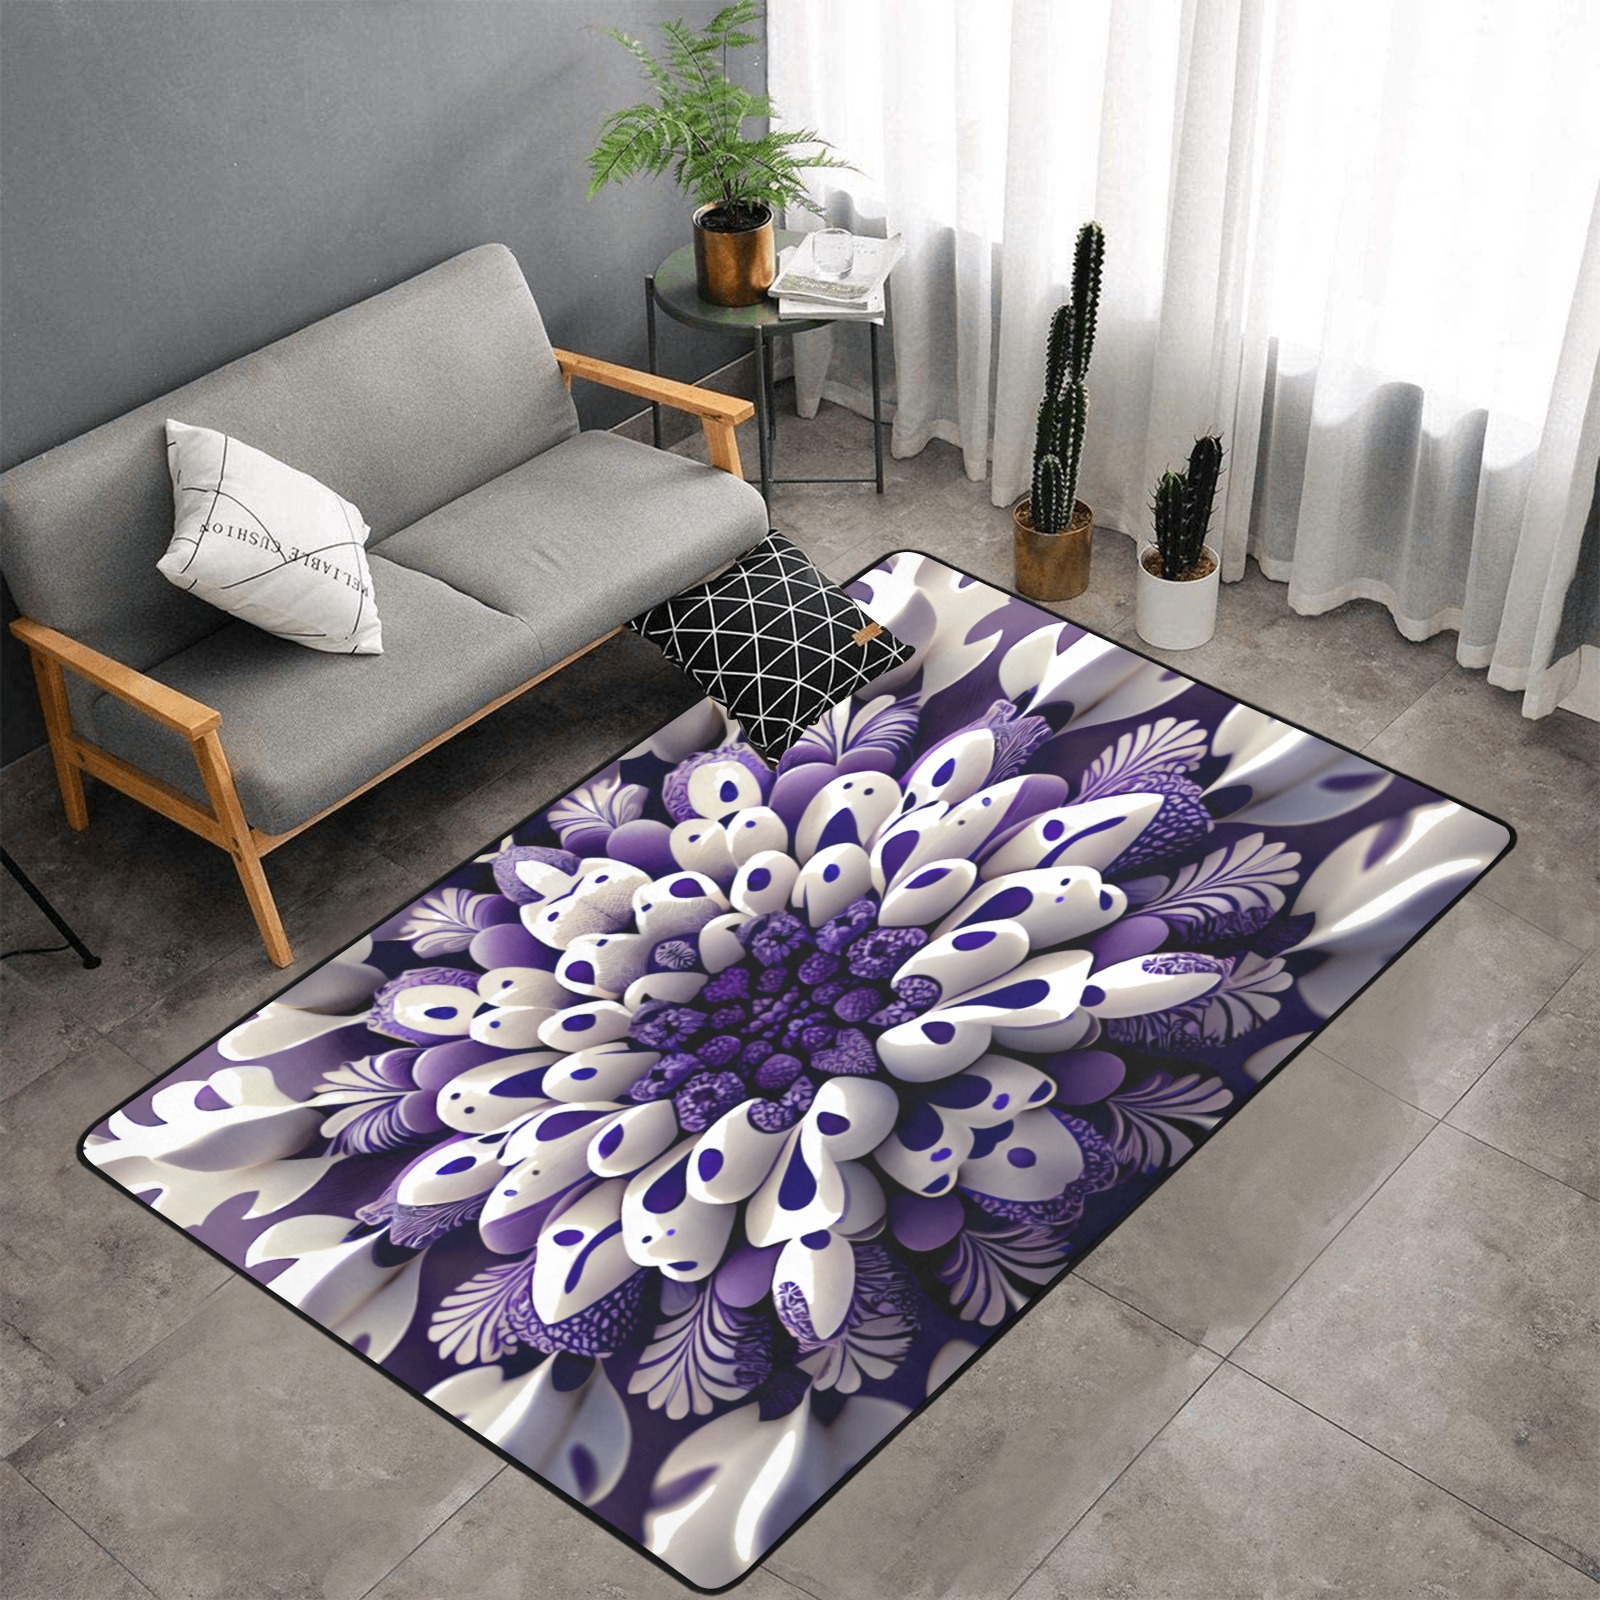 violet and white floral pattern Area Rug with Black Binding 7'x5'